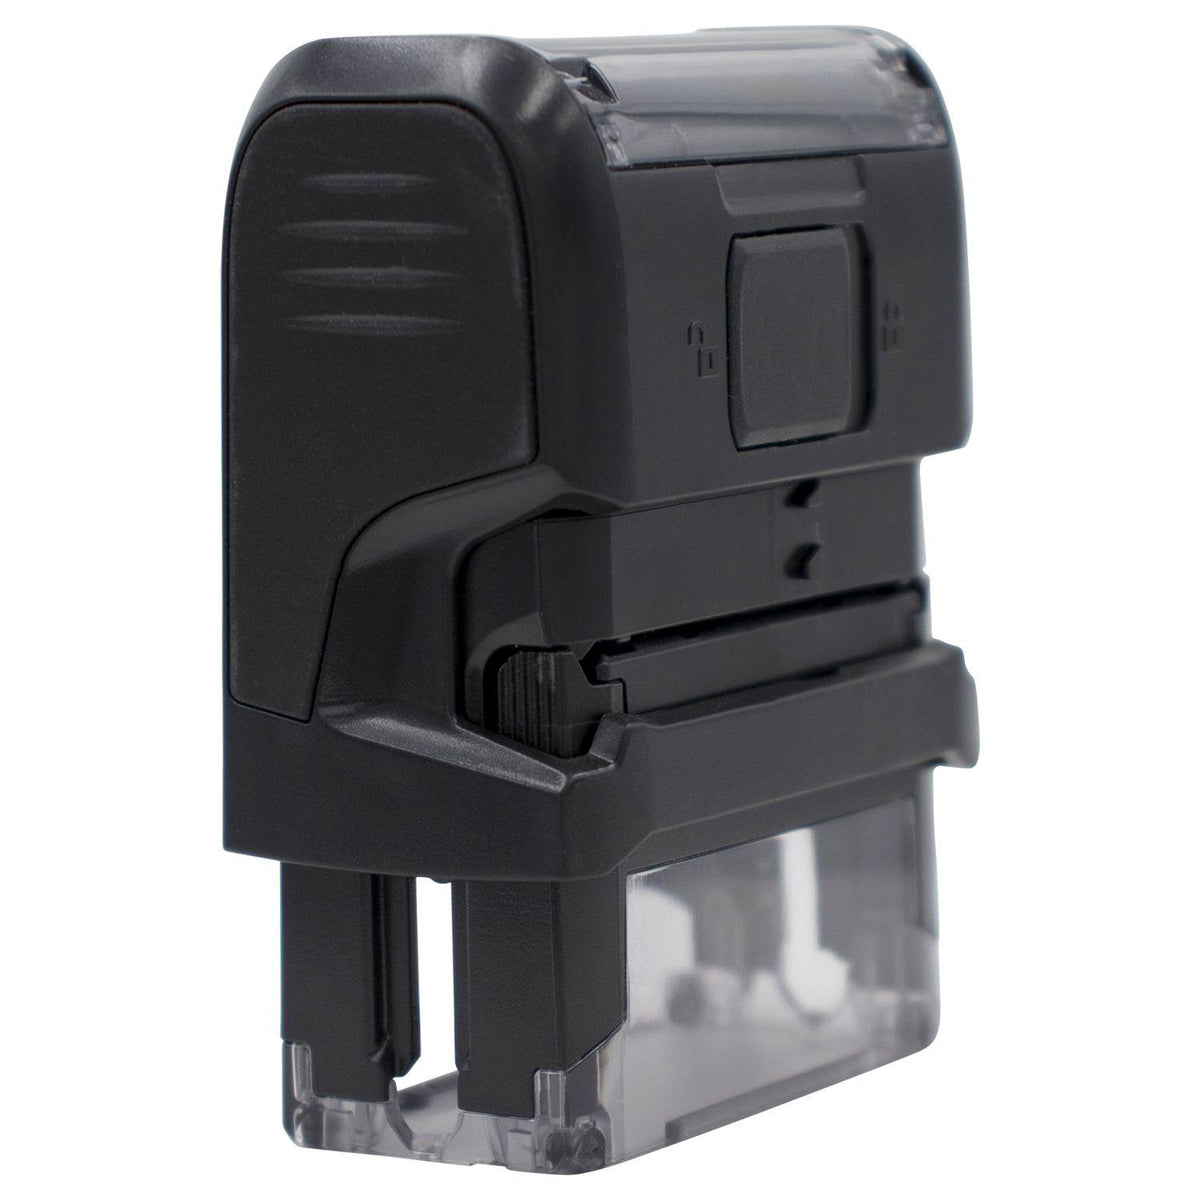 Self-Inking Spoiled Stamp - Engineer Seal Stamps - Brand_Trodat, Impression Size_Small, Stamp Type_Self-Inking Stamp, Type of Use_Business, Type of Use_General